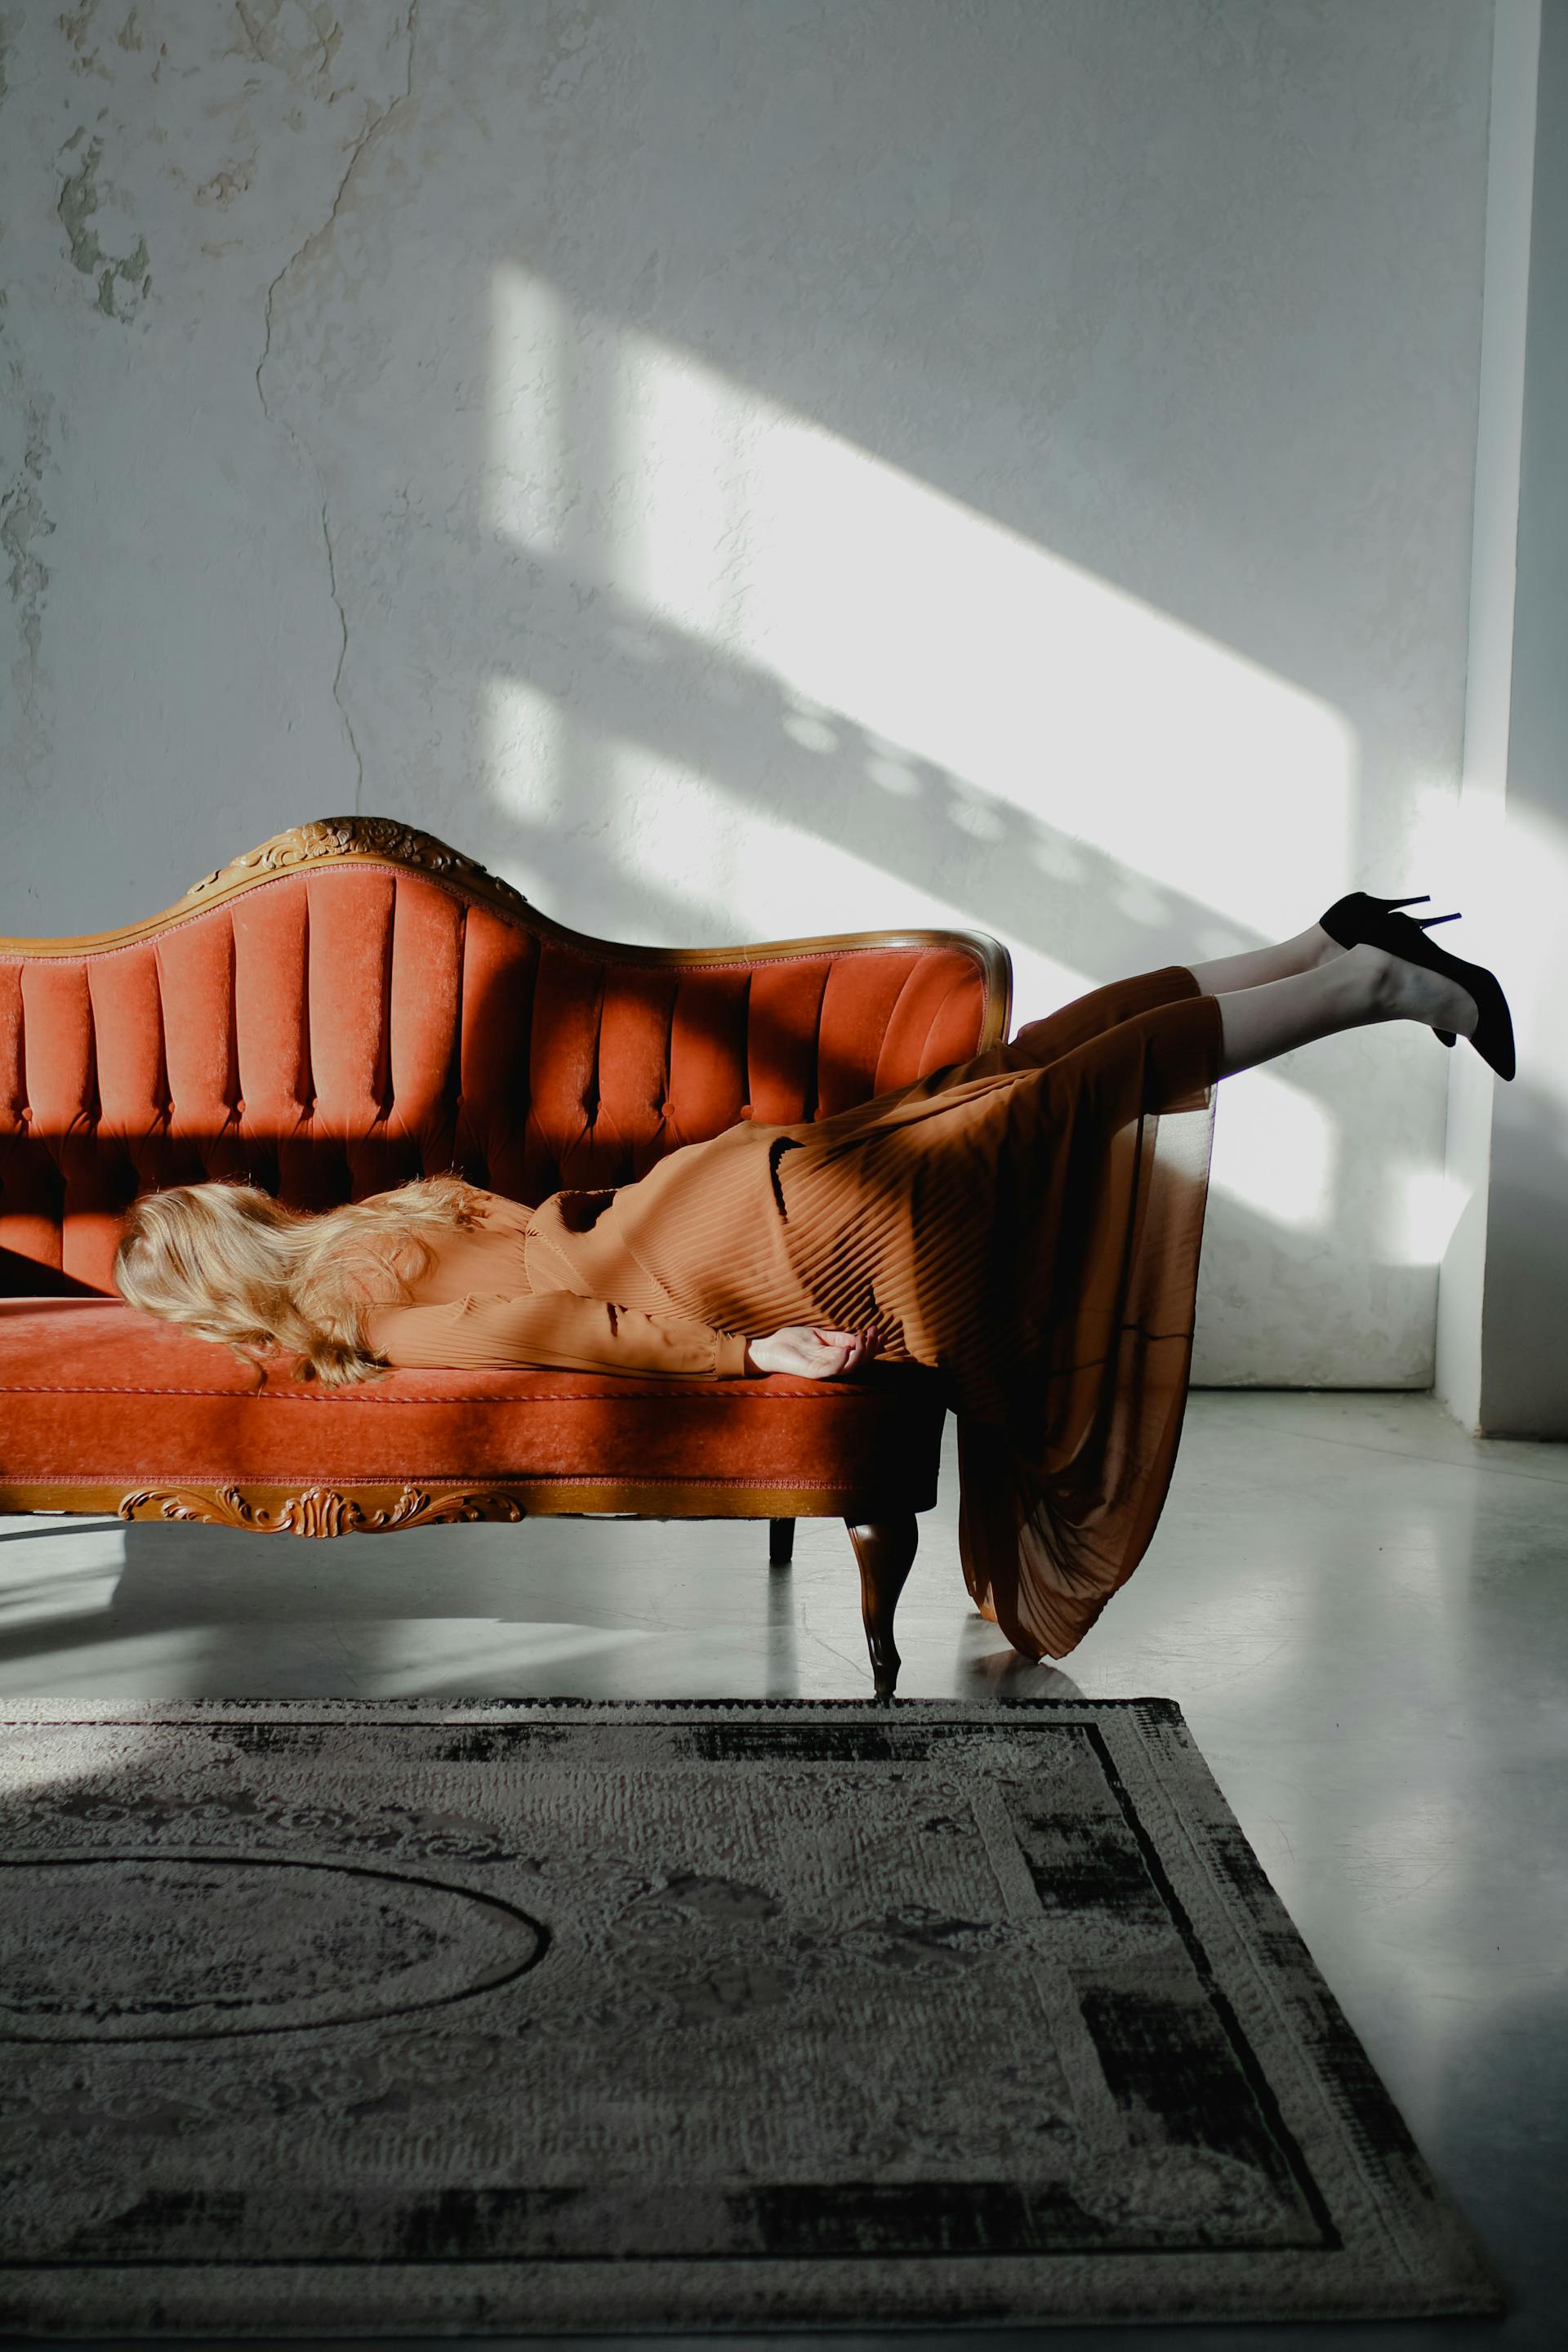 An exhausted woman lying on a sofa | Source: Pexels